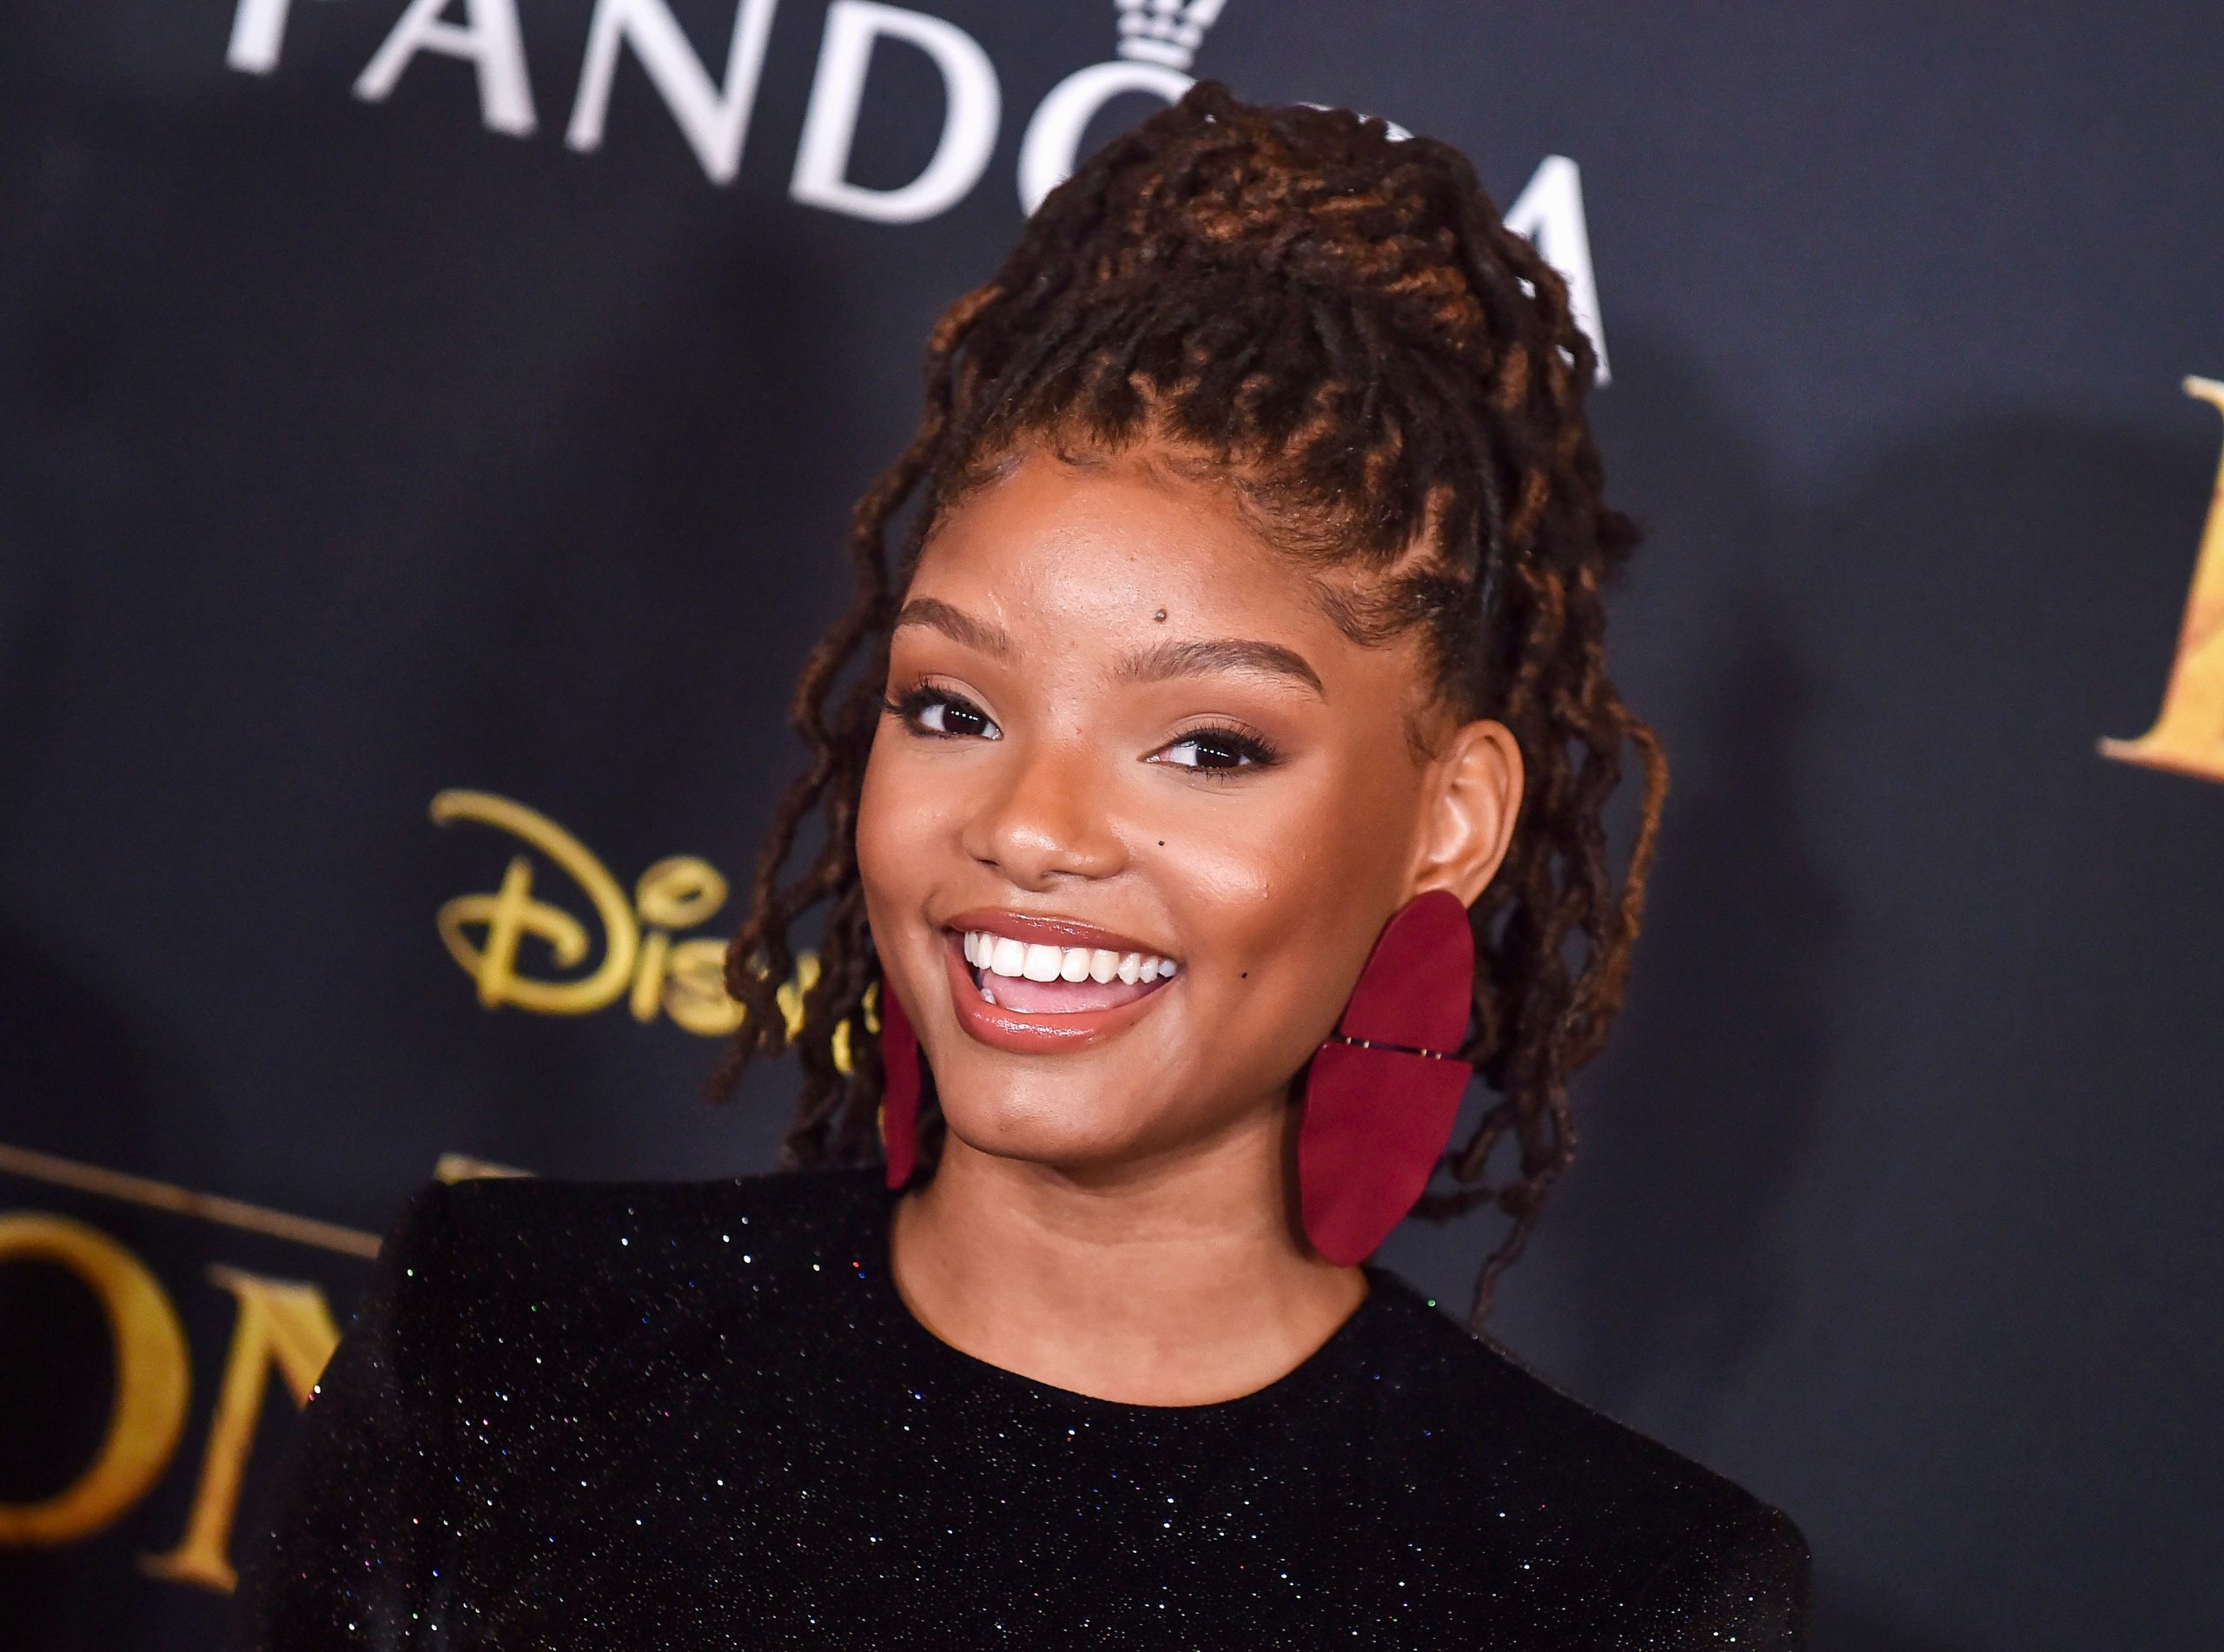 Halle Bailey Details Why She Kept Her Pregnancy and Baby Private: ‘Halo Was My Gift’